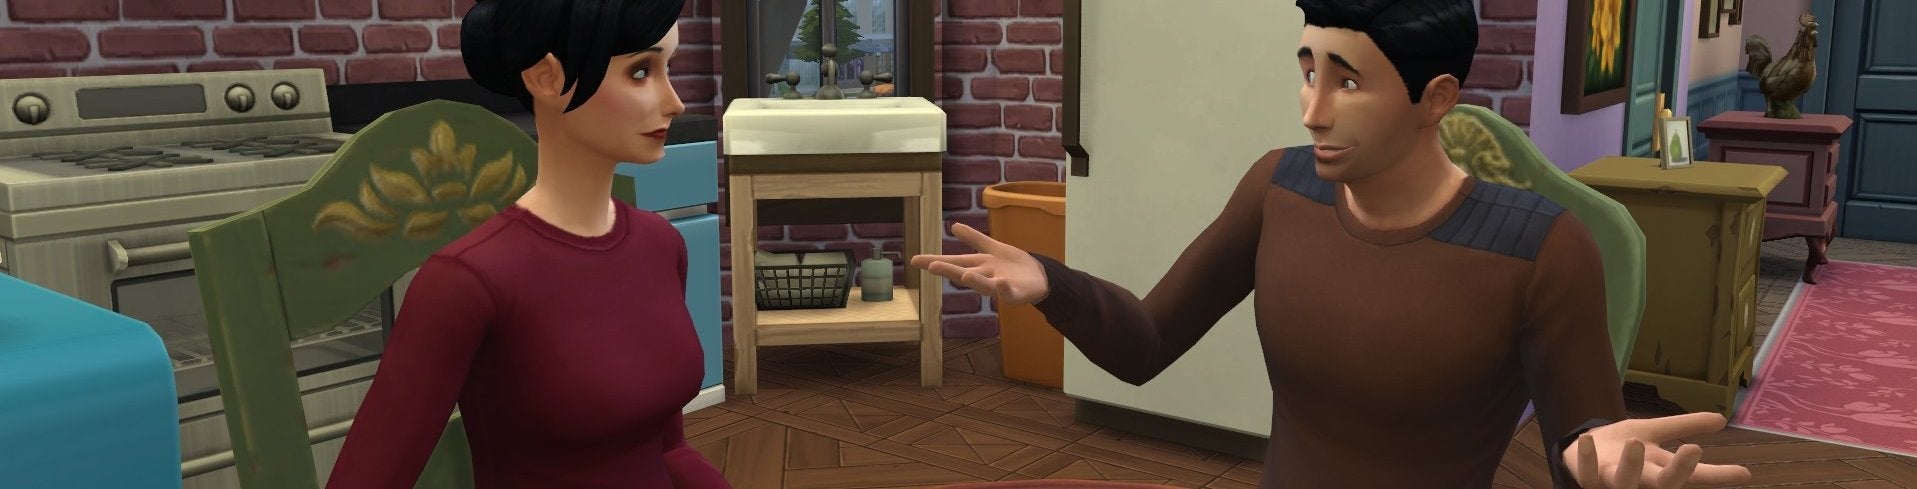 Image for The Sims 4 review